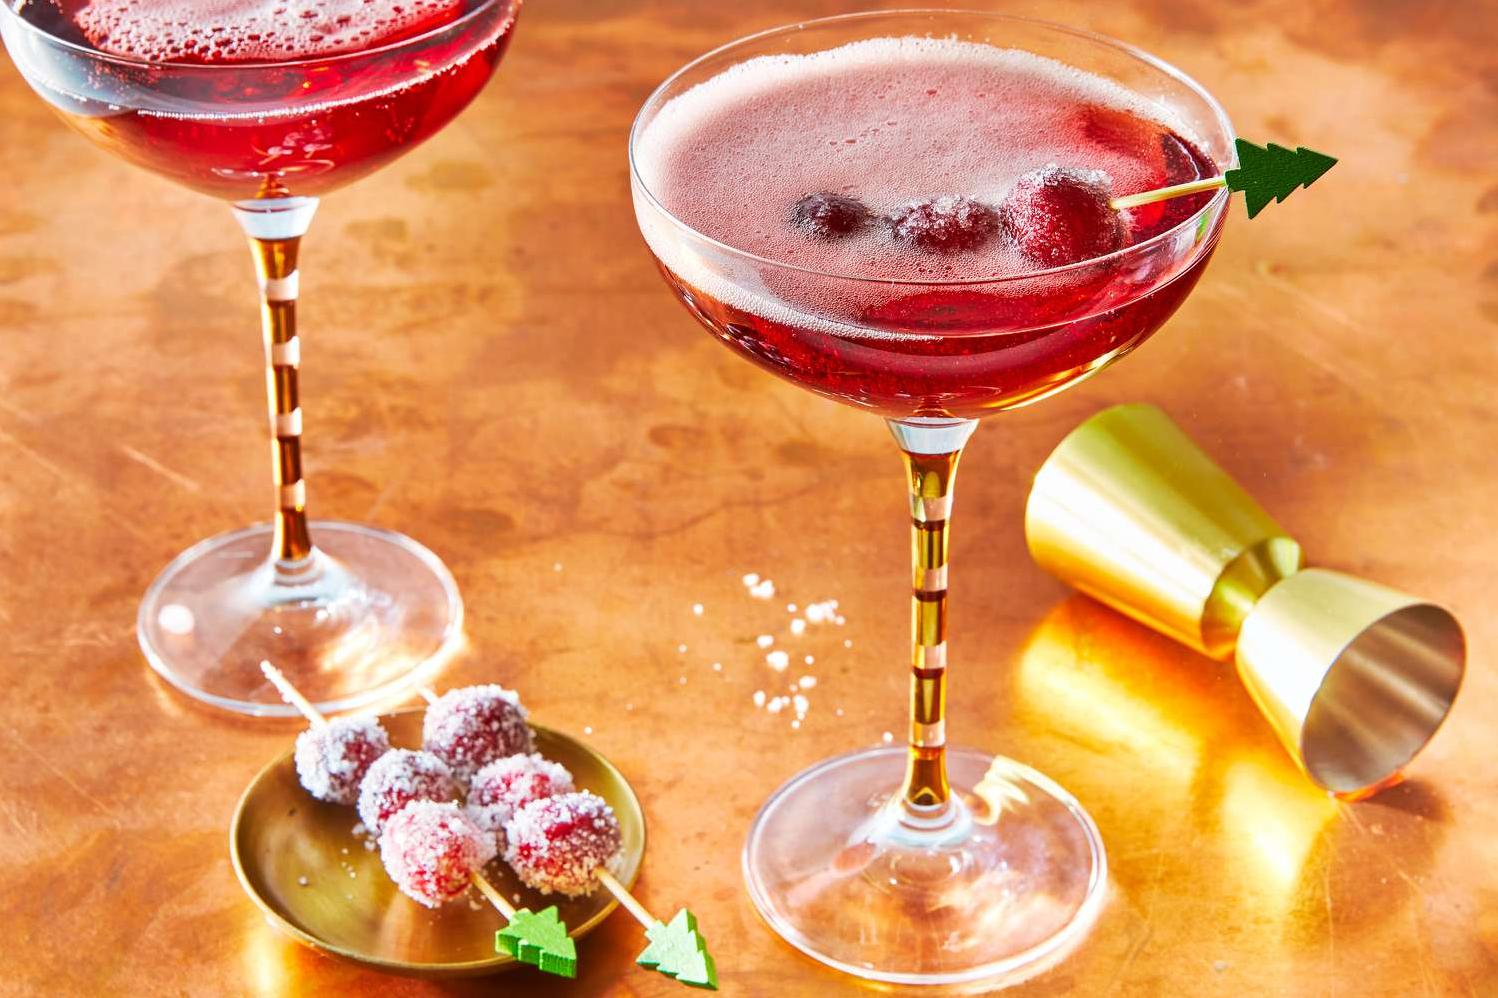  You'll be the hostess with the mostess serving these cocktails